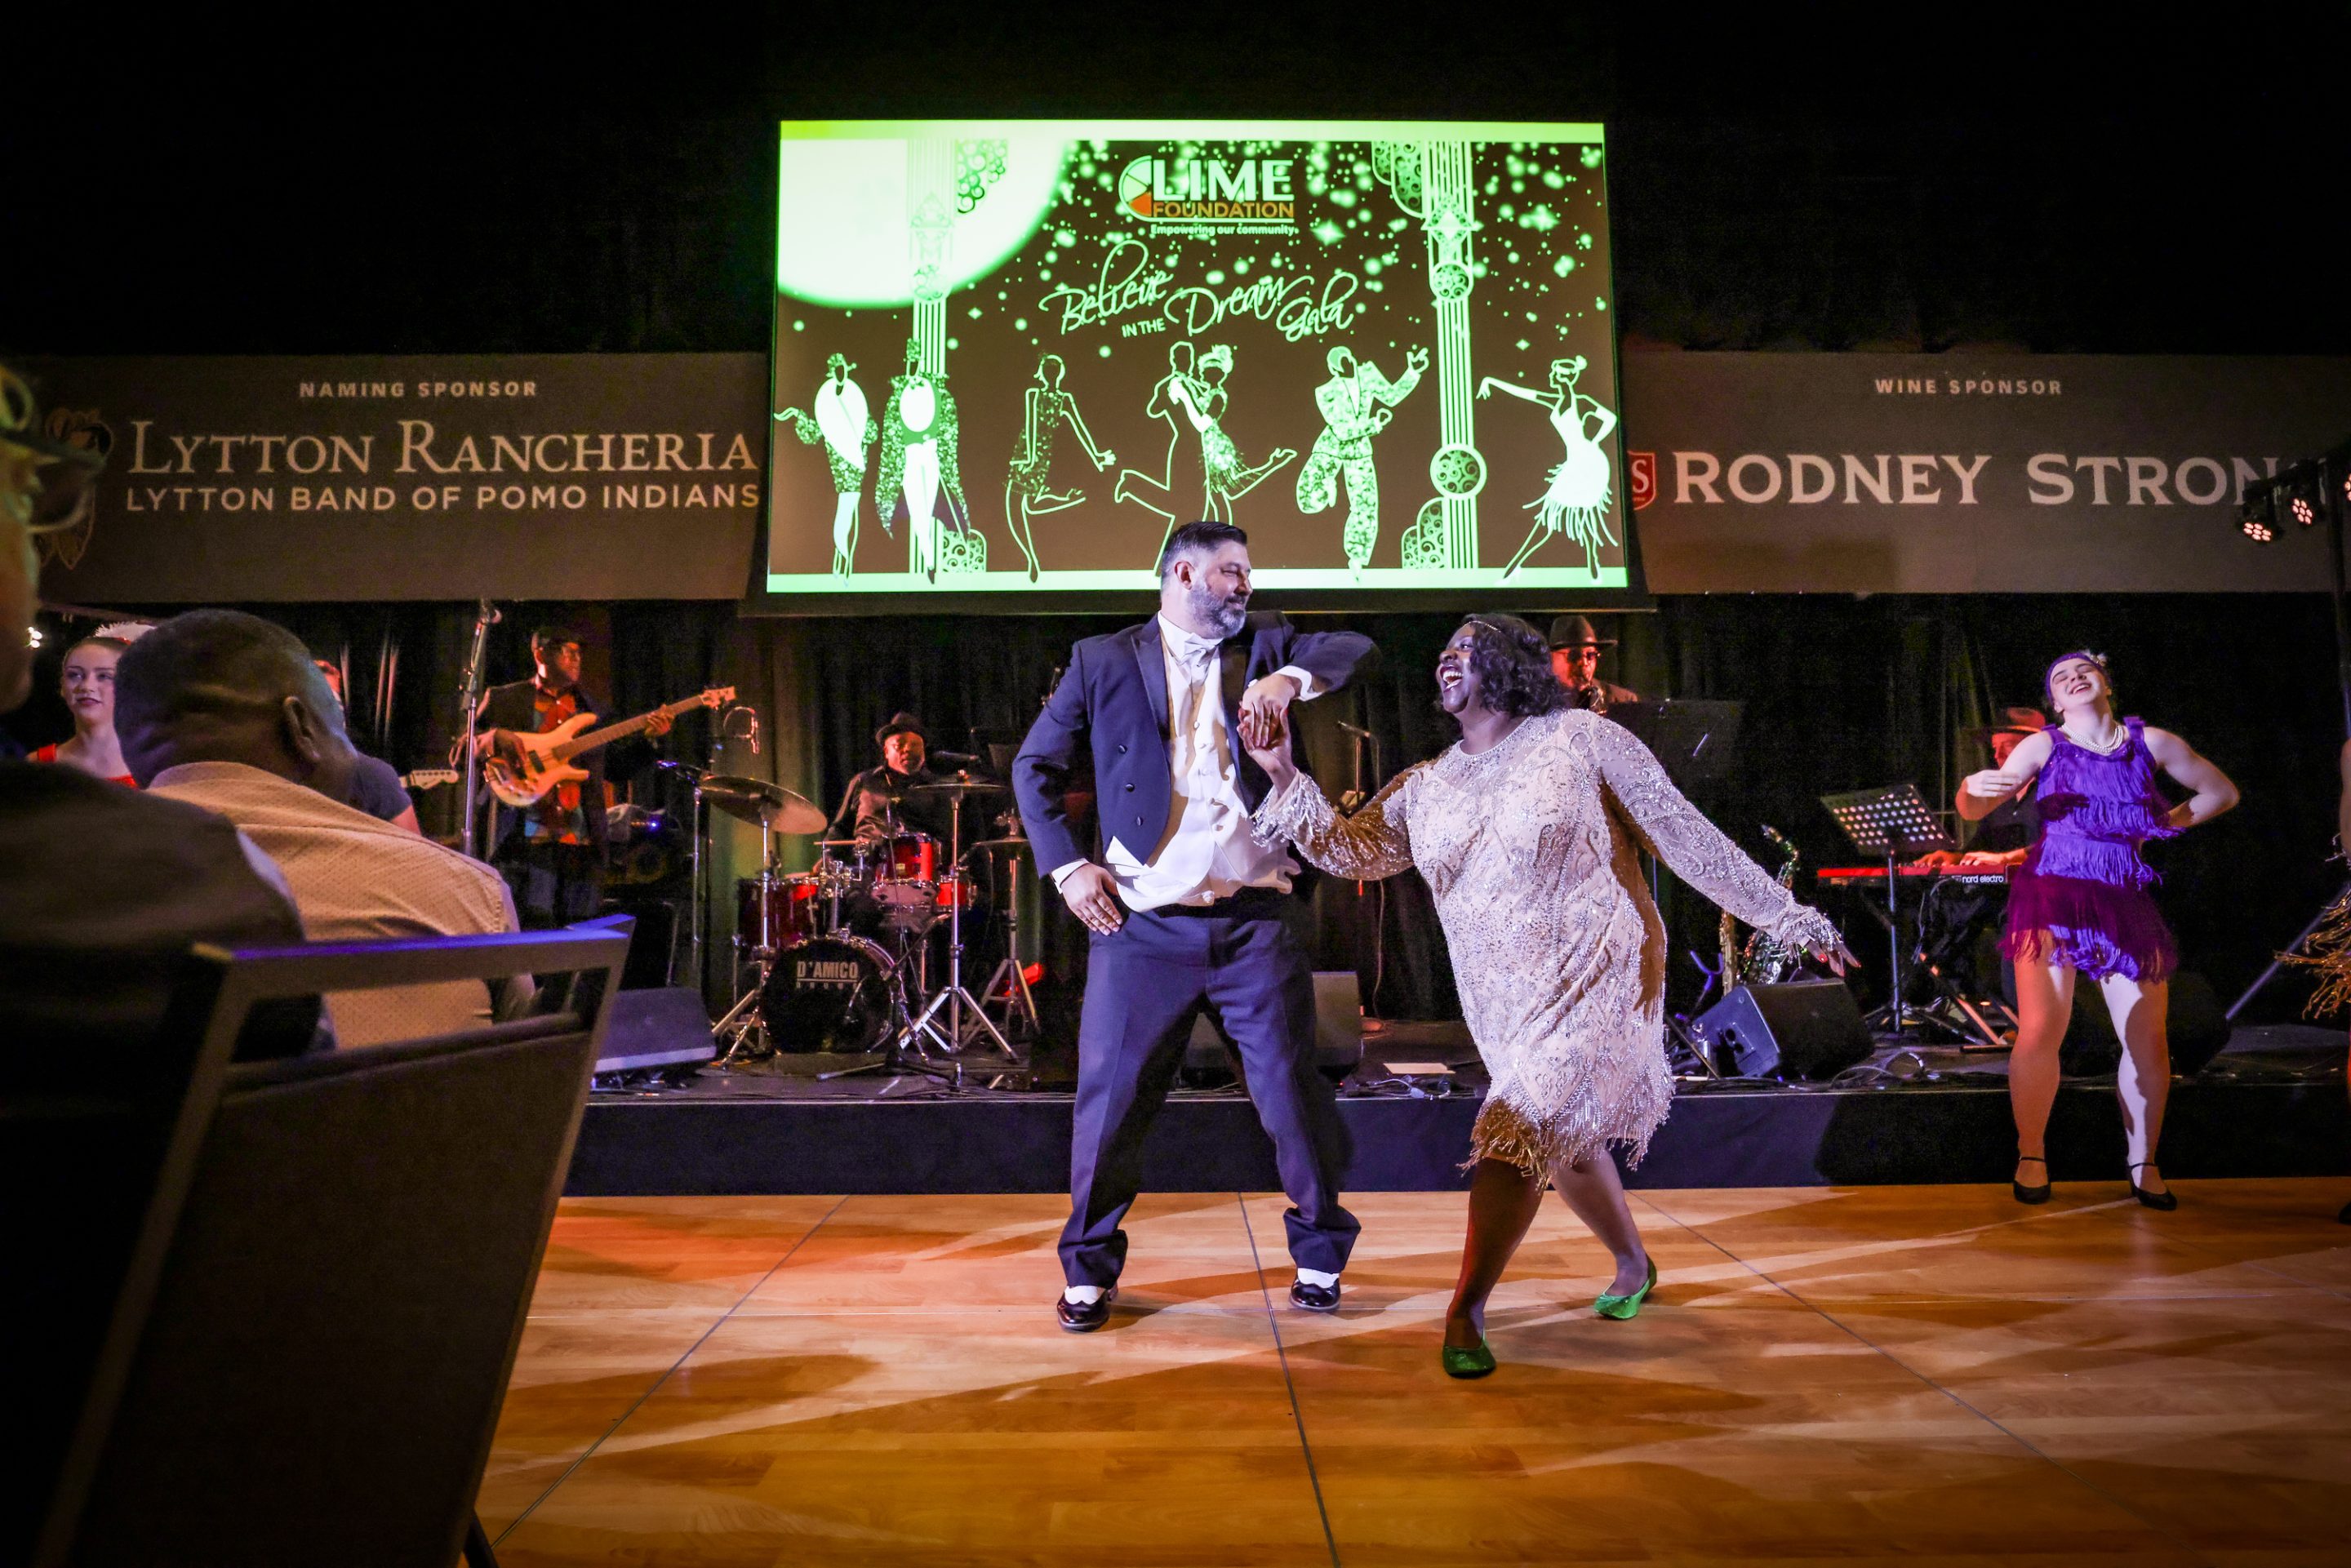 A man and woman dancing on stage at a Santa Rosa non-profit event hosted by The LIME Foundation.